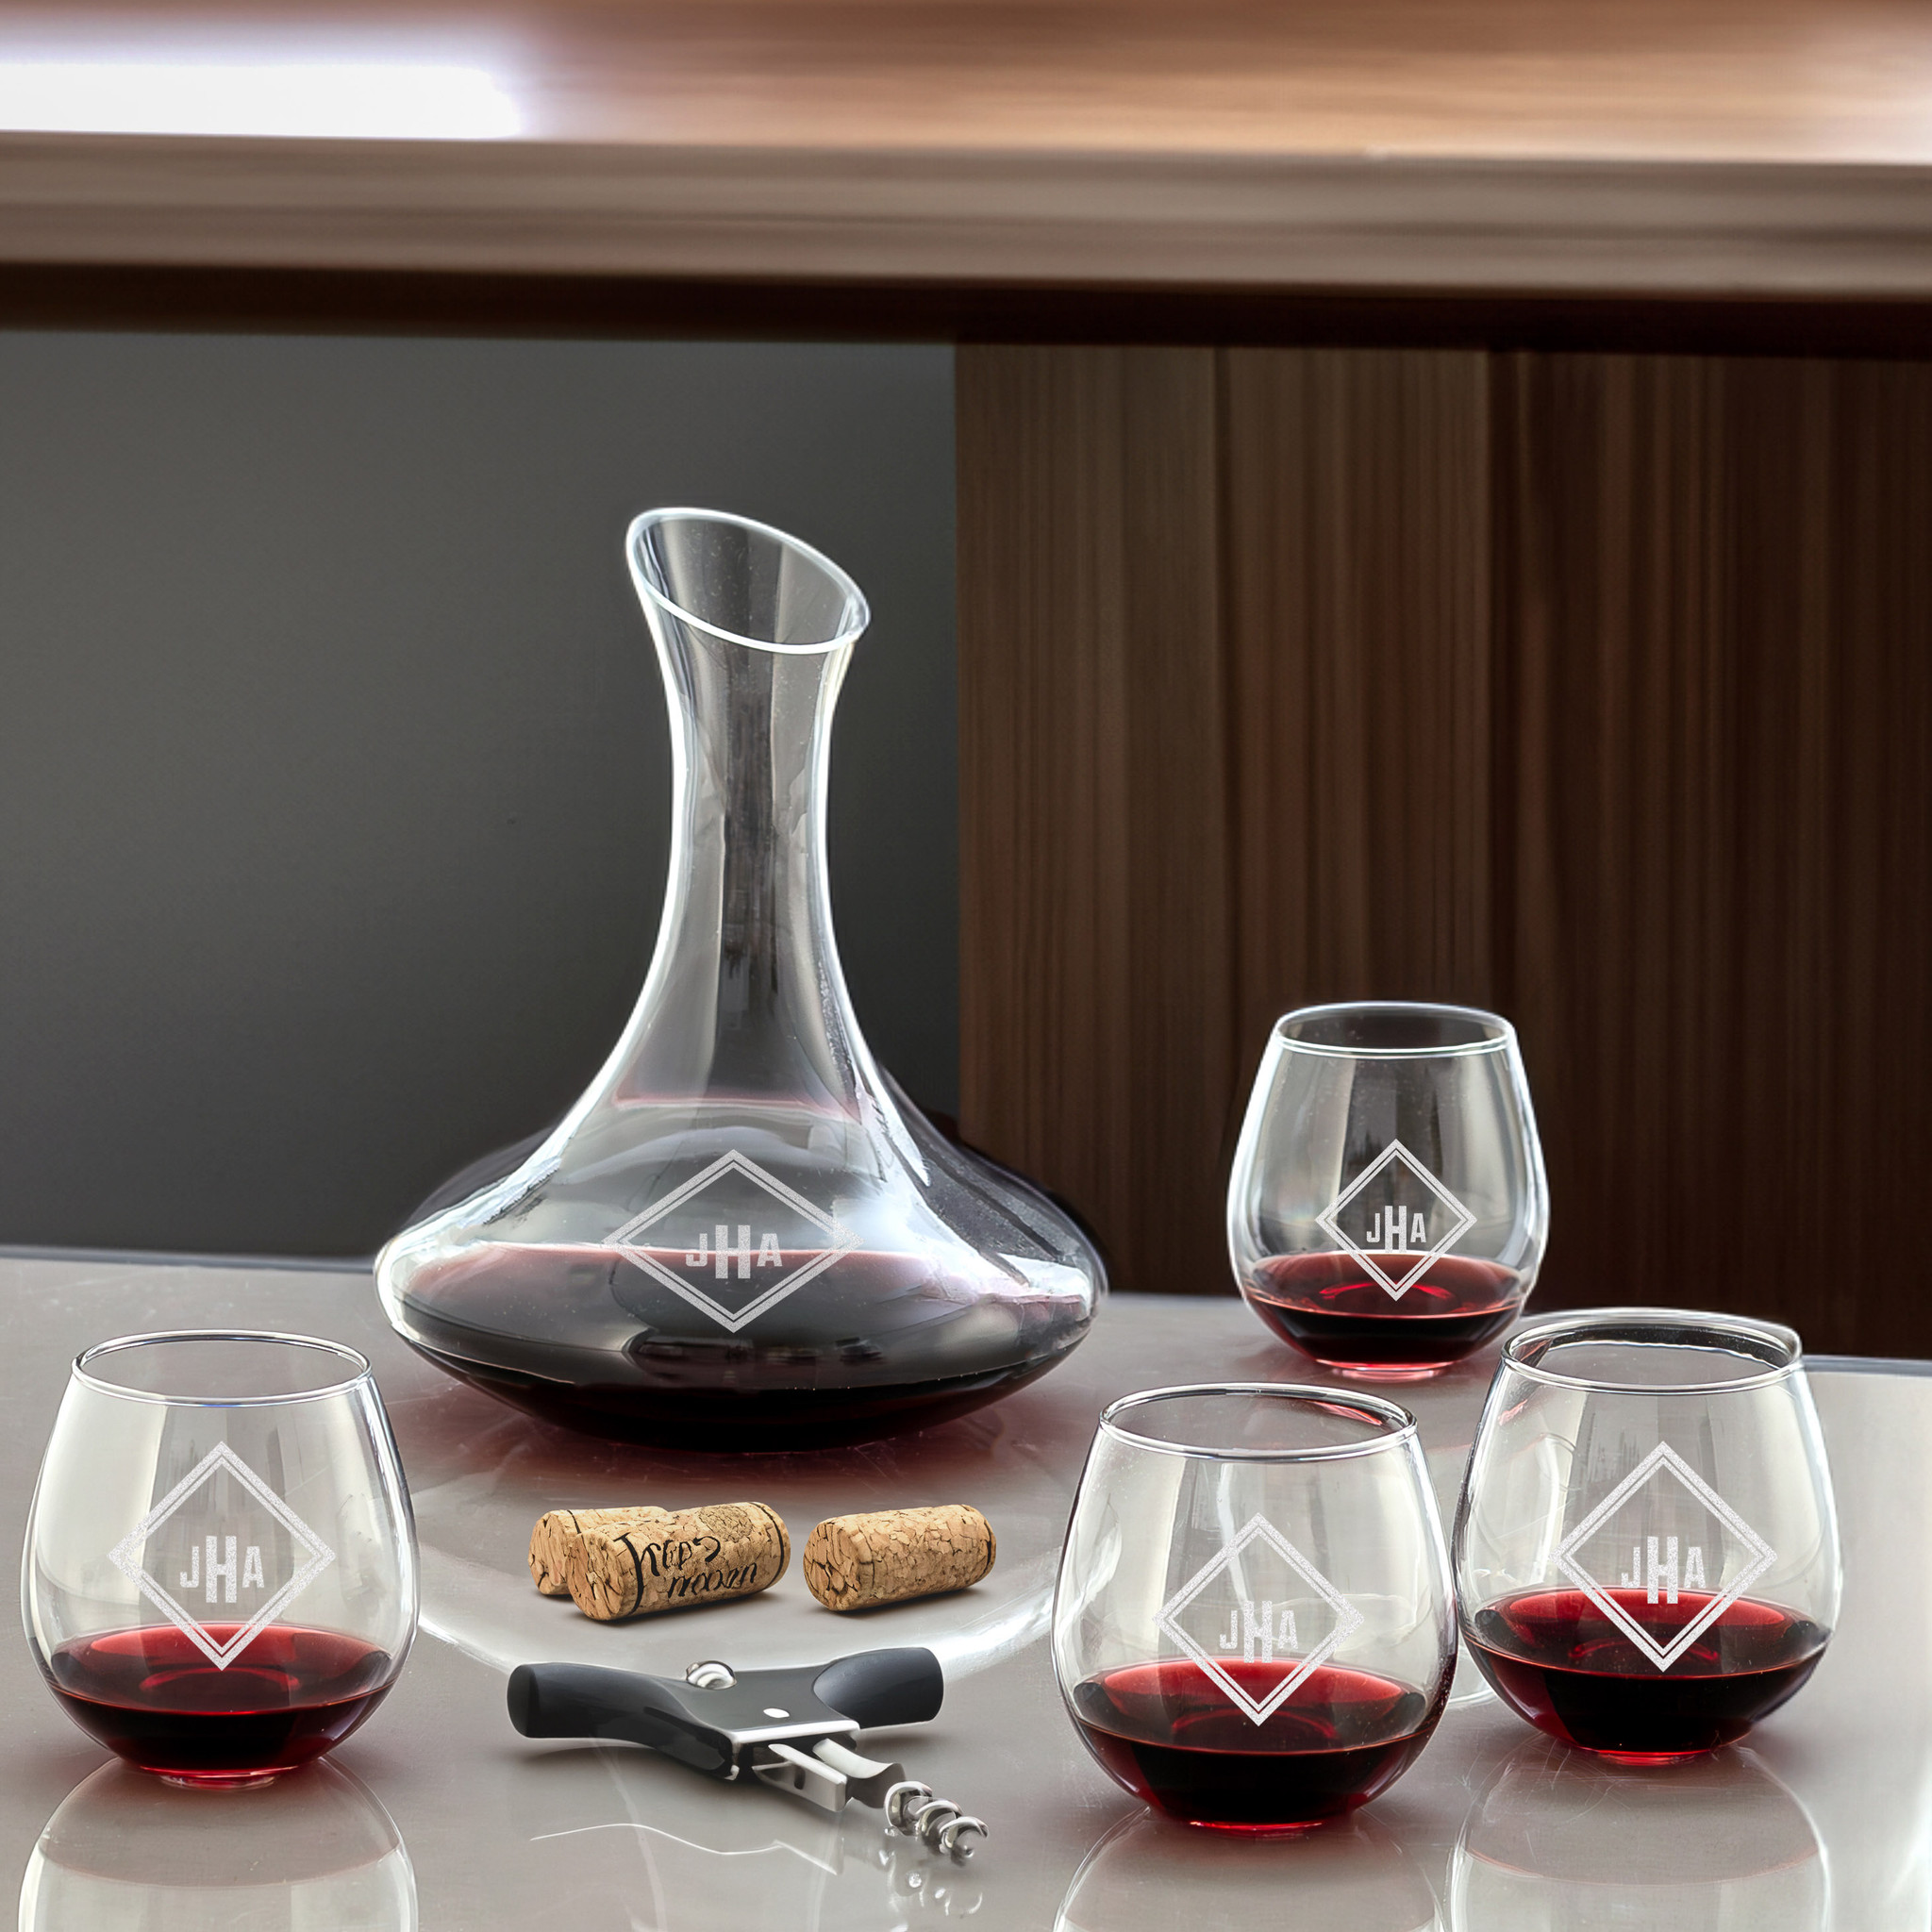 https://cdn11.bigcommerce.com/s-b5w84/images/stencil/2048x2048/products/3214/6069/9-11-23_4_pce_carafe_wine_glasses-2_1etched__88295.1696015166.jpg?c=2